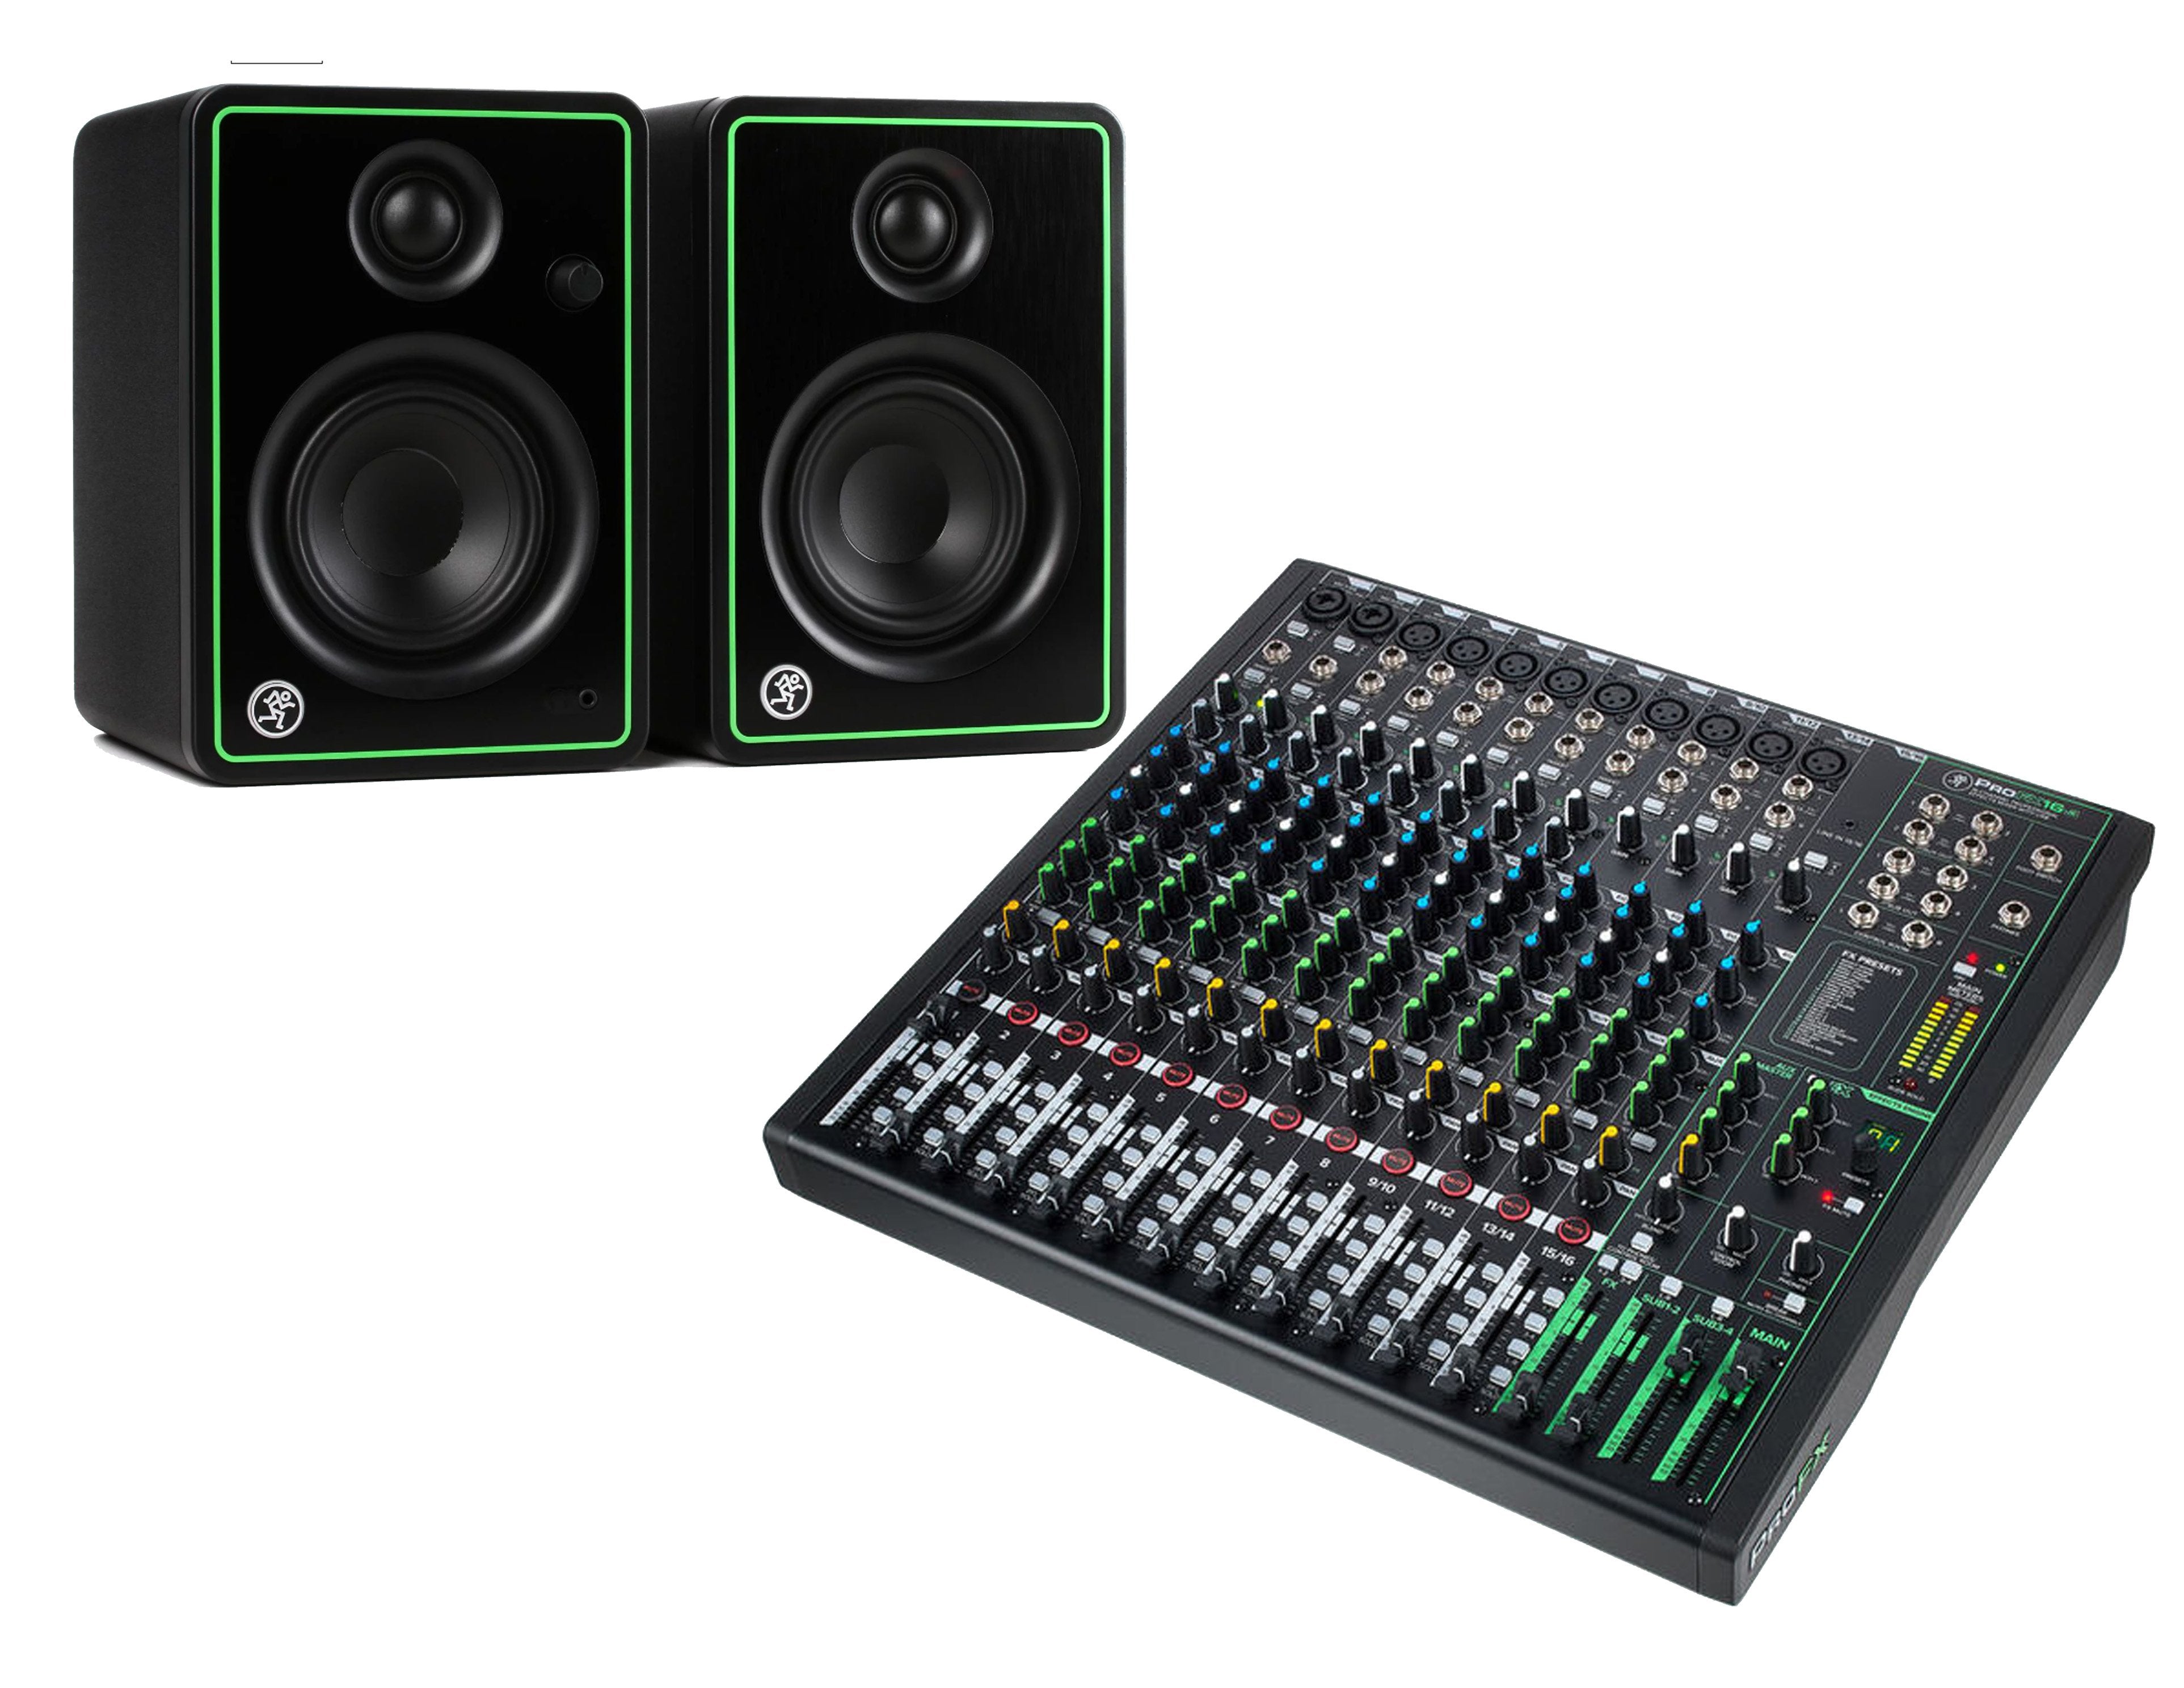 Mackie Bundle with CR4-X - Studio Monitor - Pair + ProFX16v3 16-channel Mixer with USB and Effects - image 1 of 1